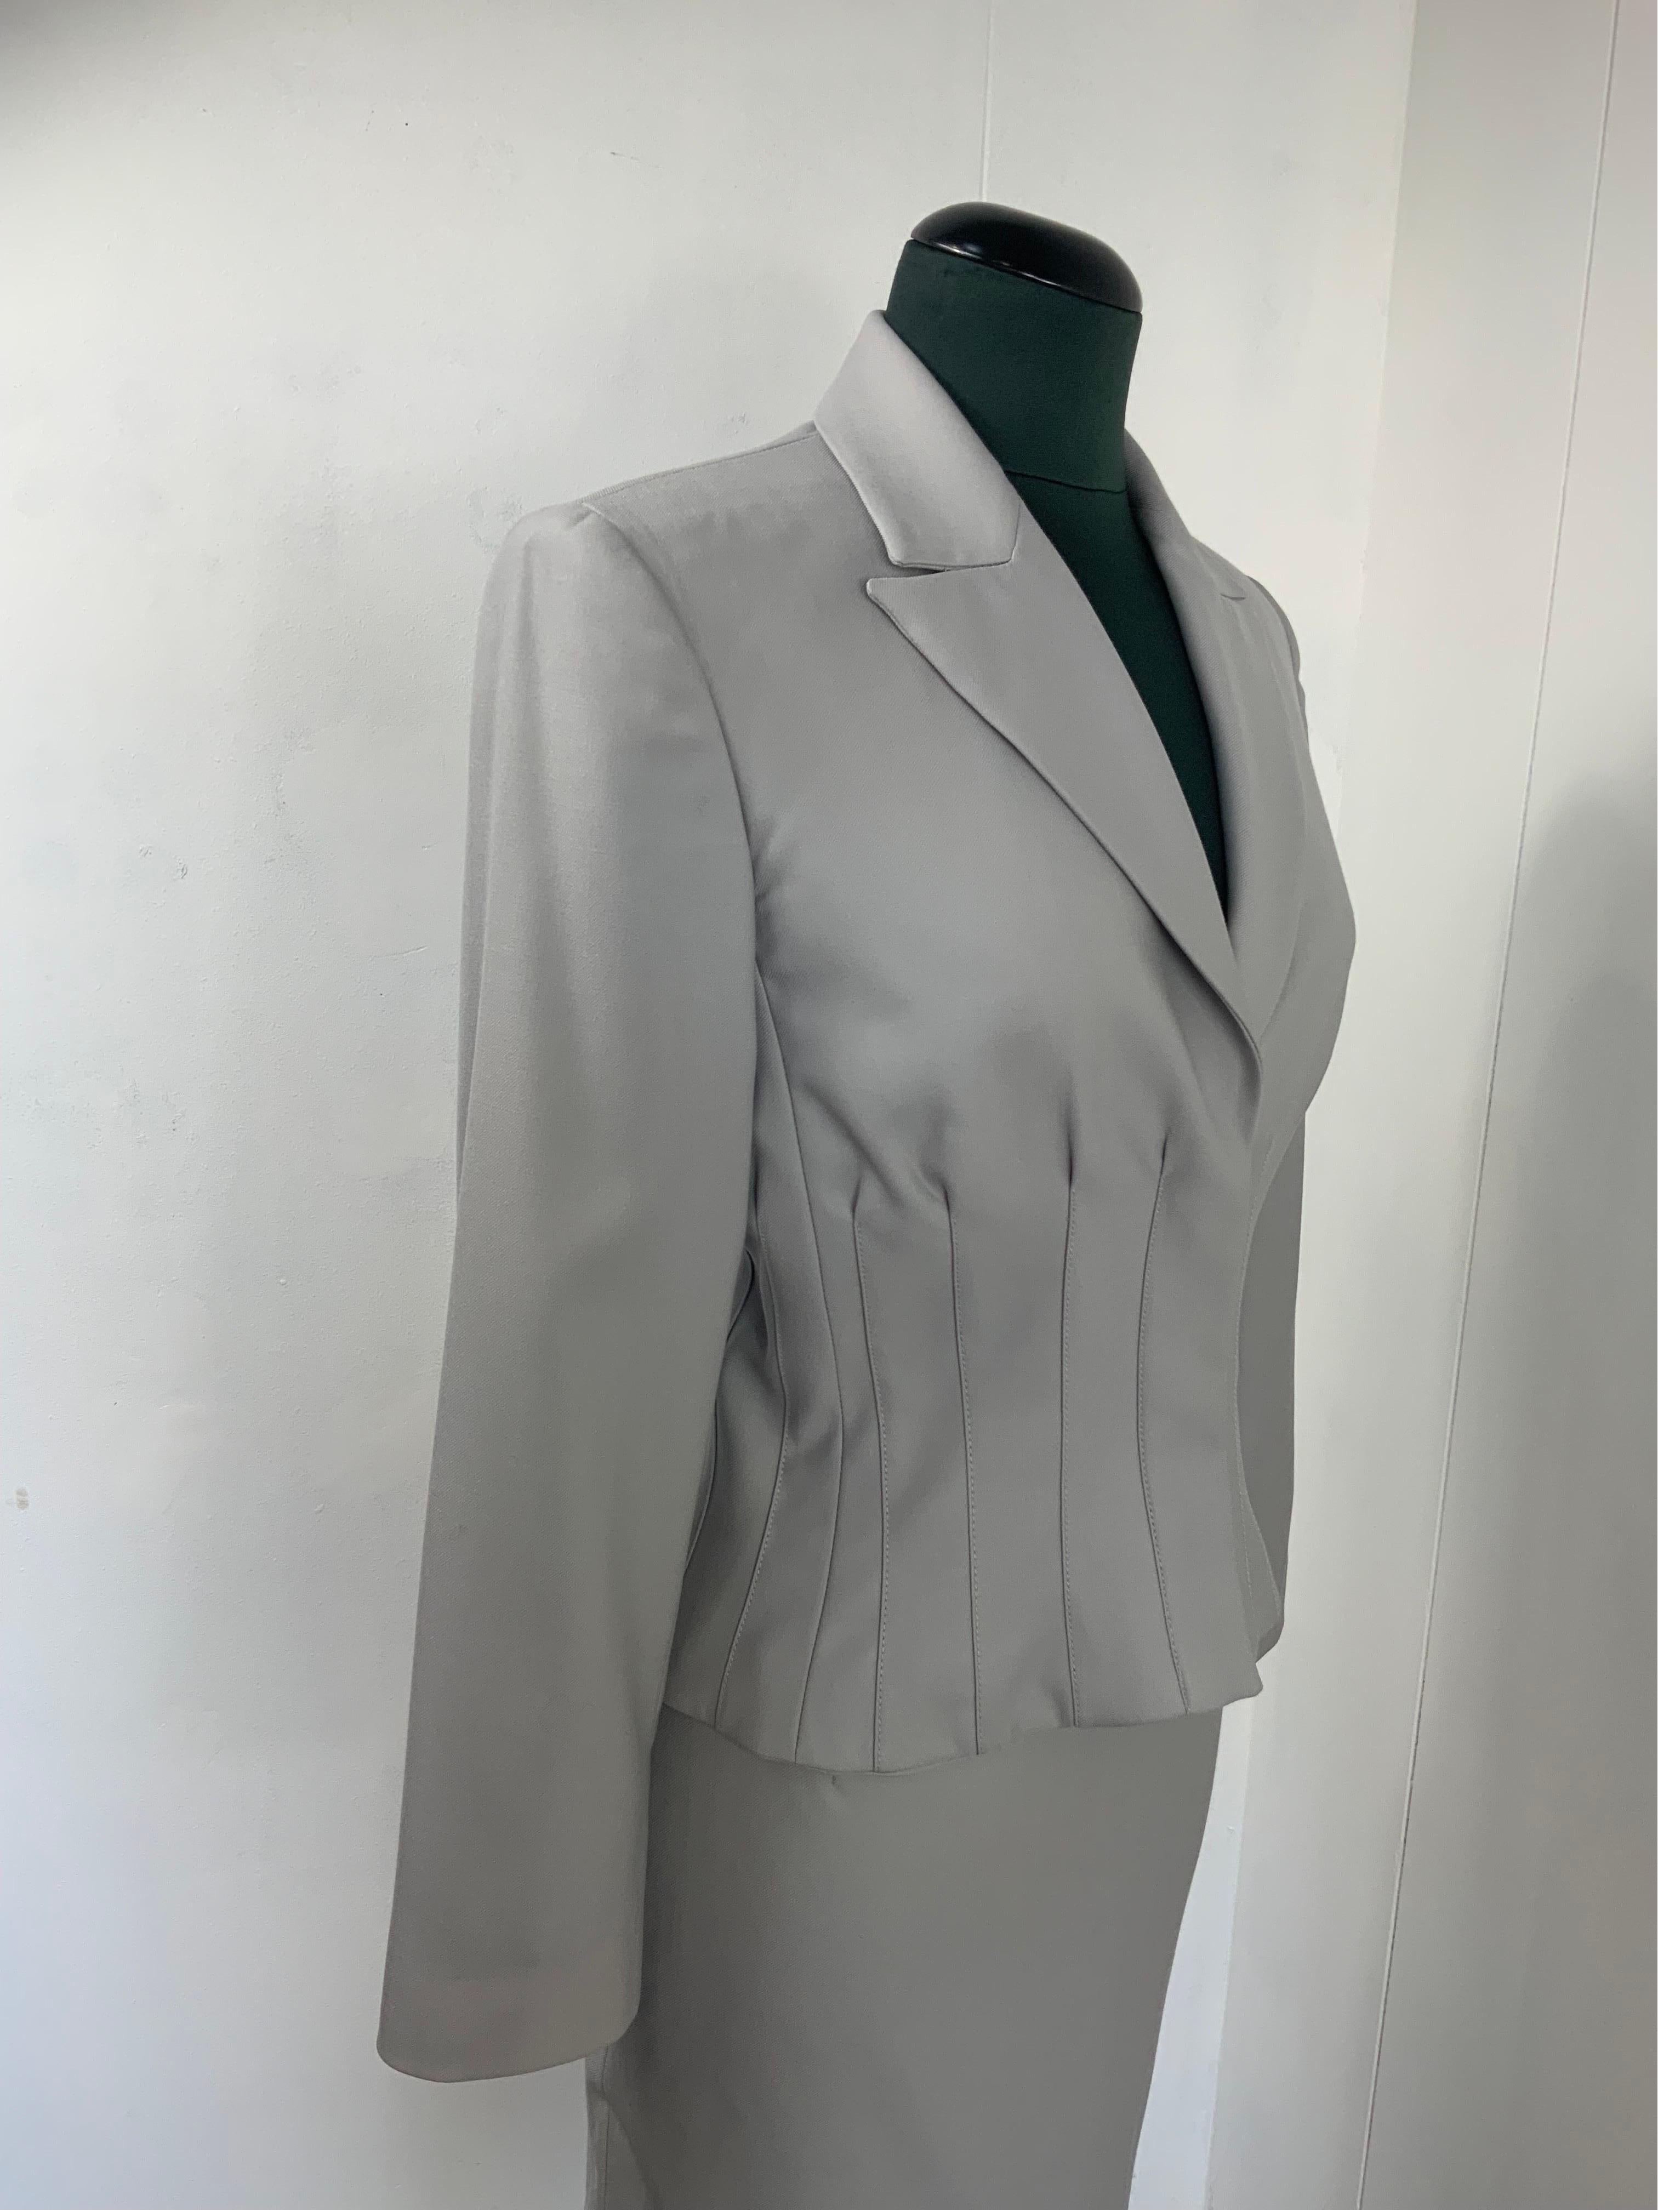 90s womens suits